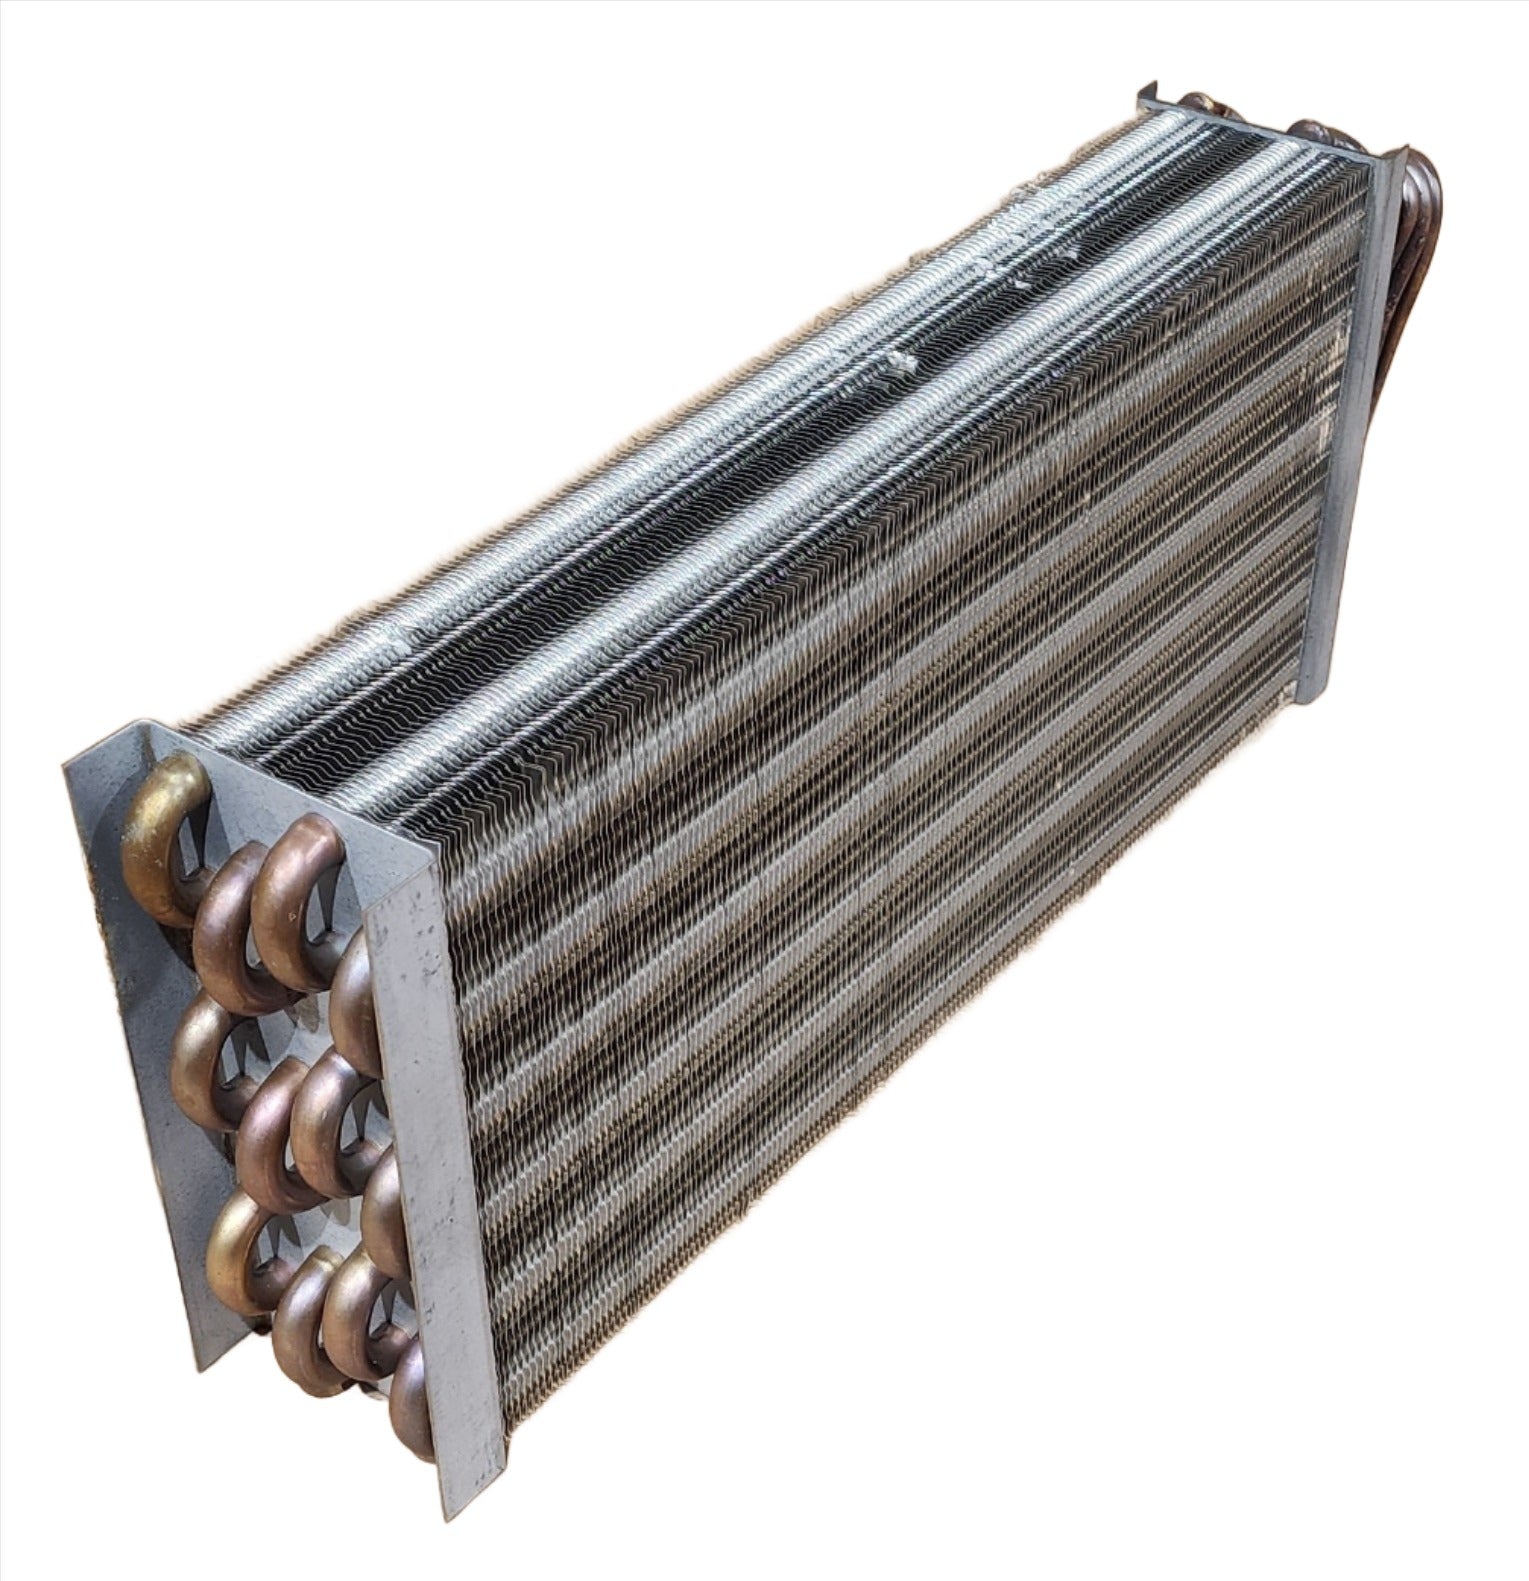 AC Evaporator Coil Core for Red Dot R-8545 Units 76R5300